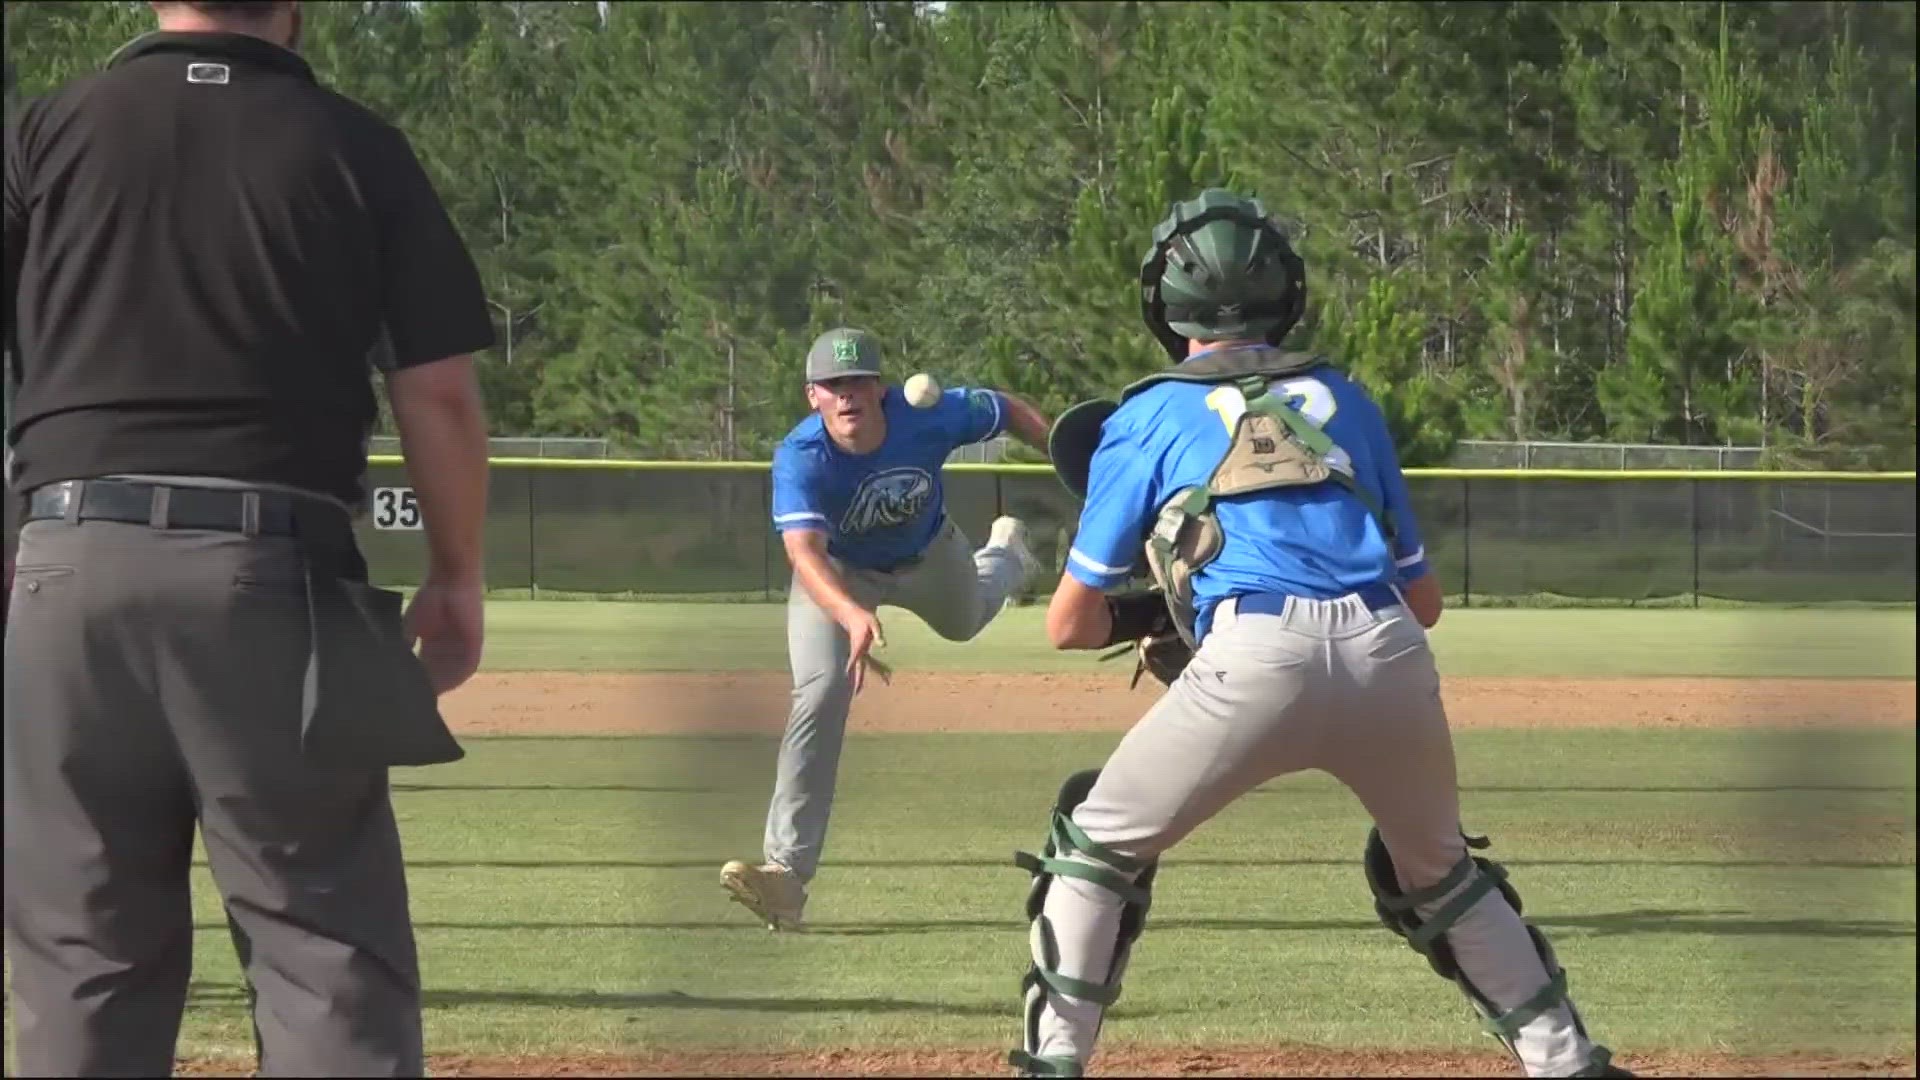 The Stingrays pulled out the 10-7 win over the Hawks Saturday at Atlantic Coast High School. The CCBL features five teams and lots of local college baseball players.